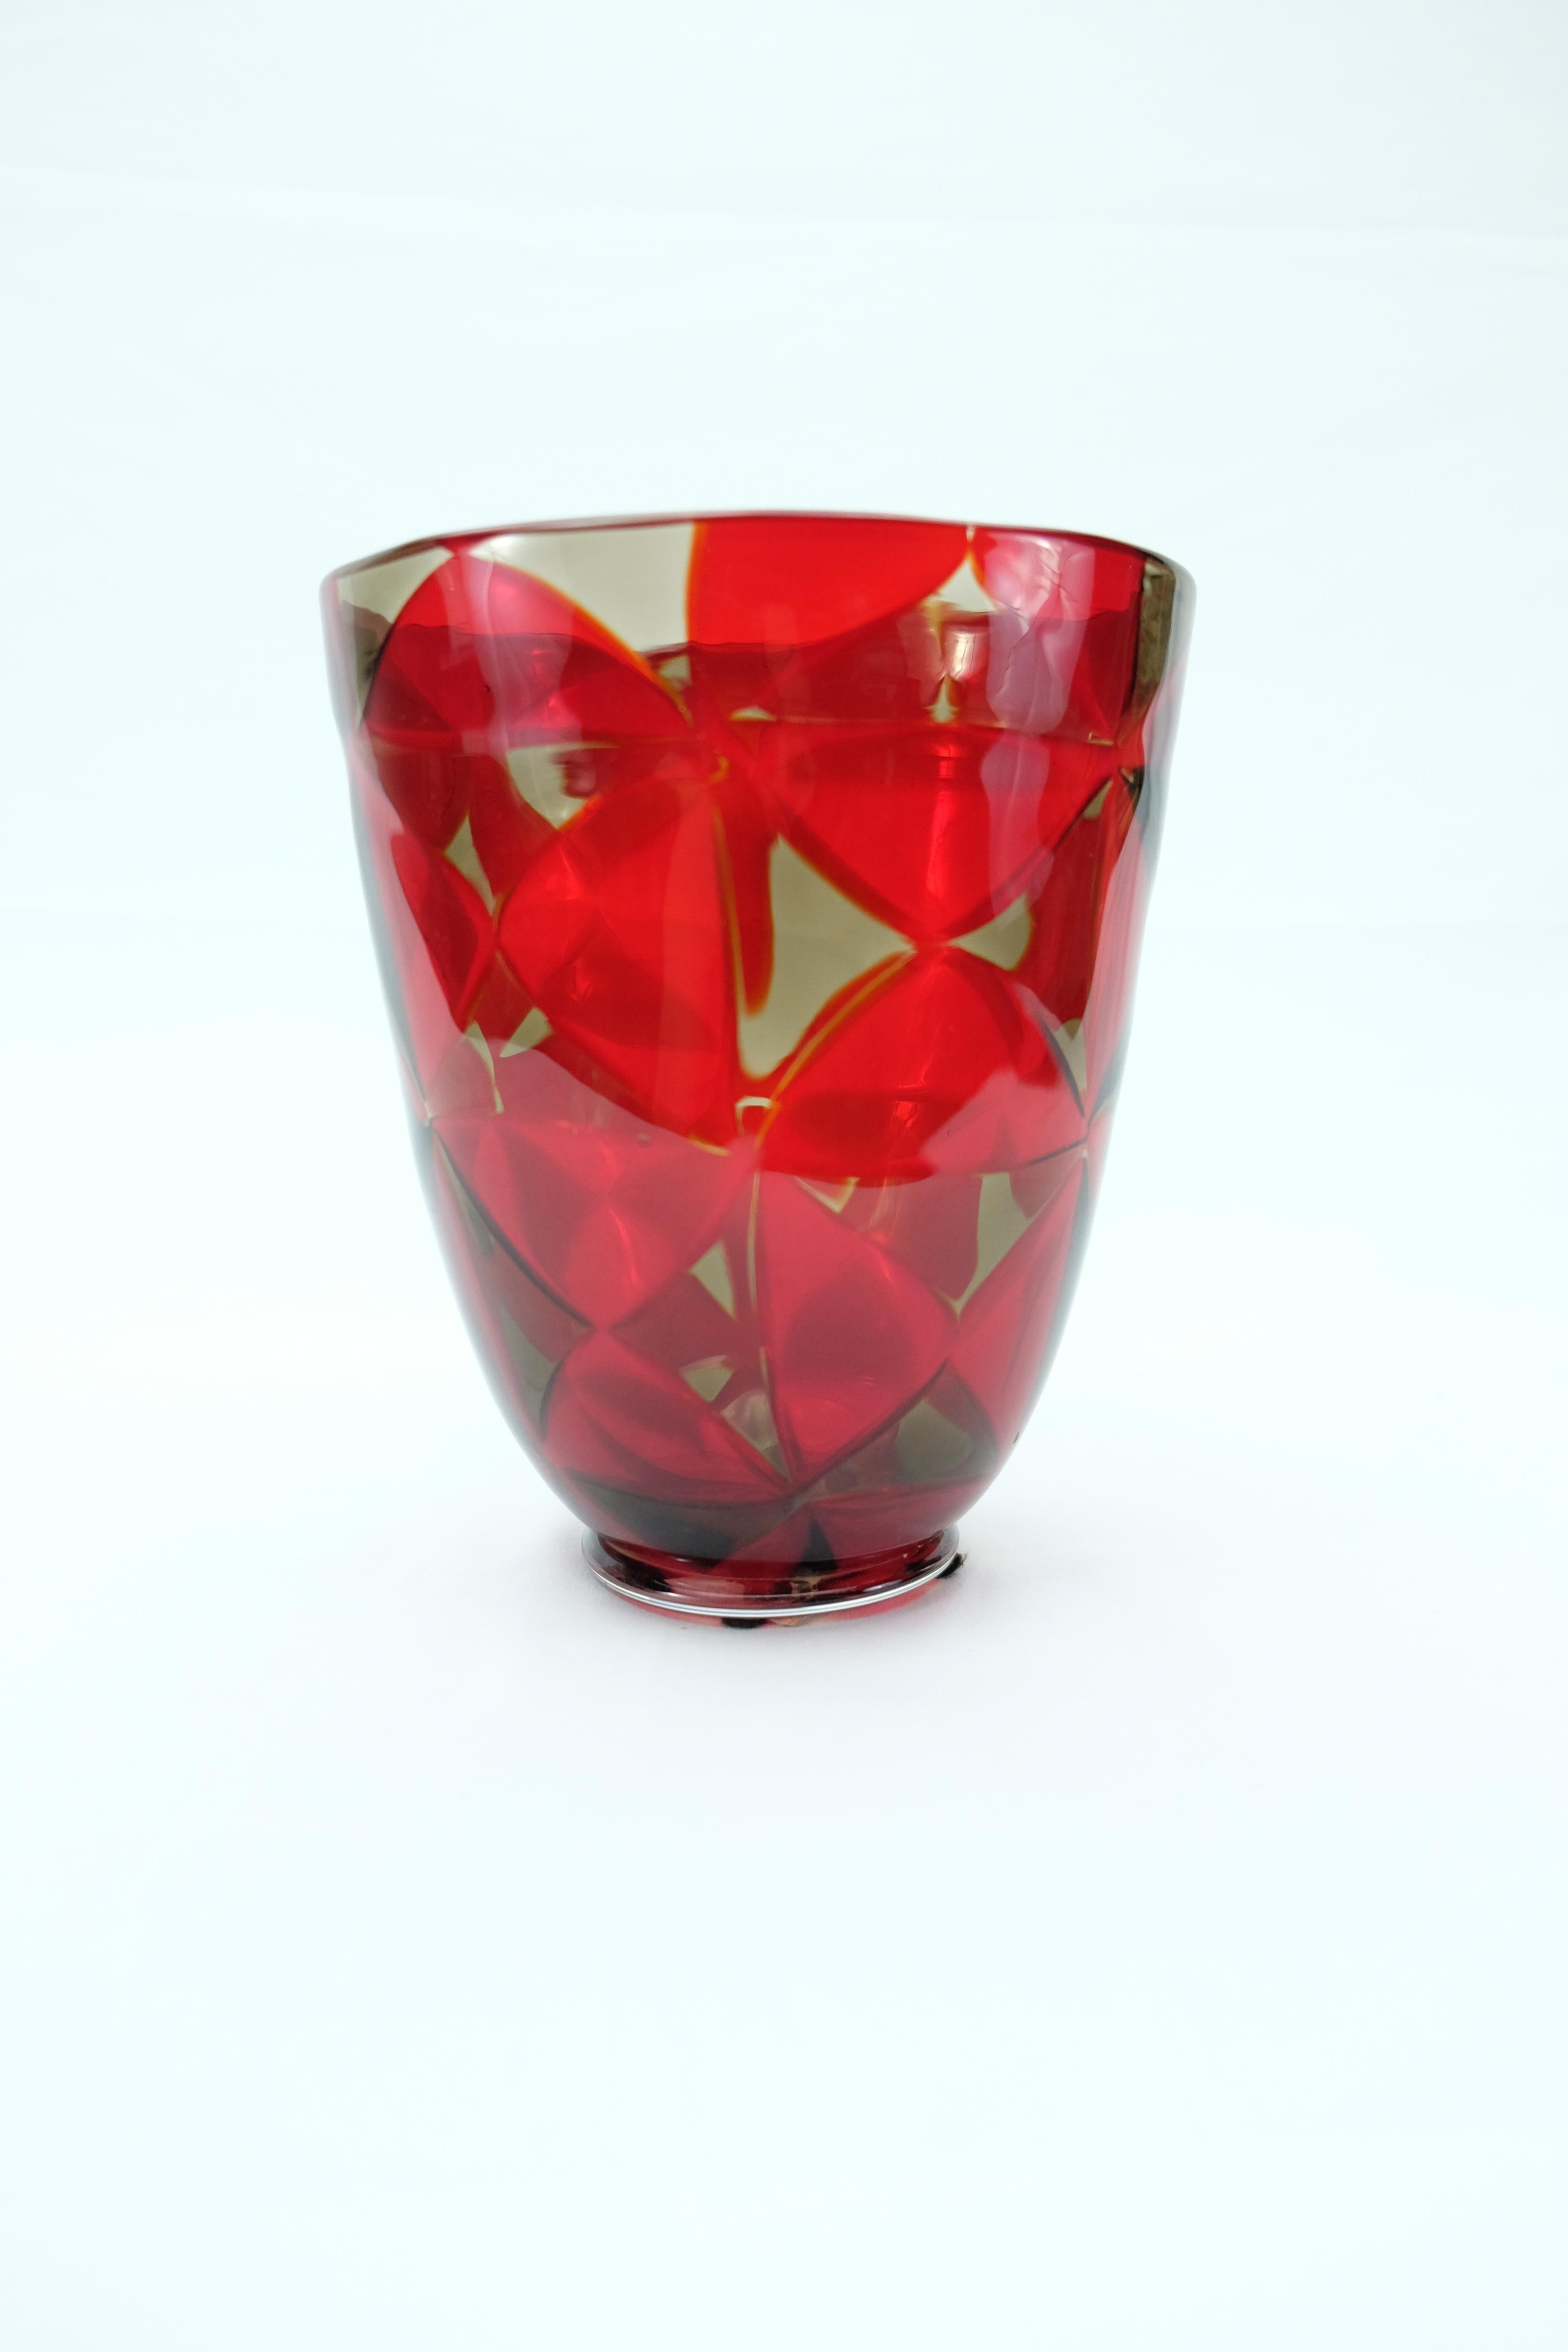 Barovier & Toso red Mosaic triangle Murano glass vase offered for sale is a magnificent hand blown red mosaic triangle Murano glass vase by Barovier & Toso. The hand blown vase is signed on the base and retains the original maker's label.